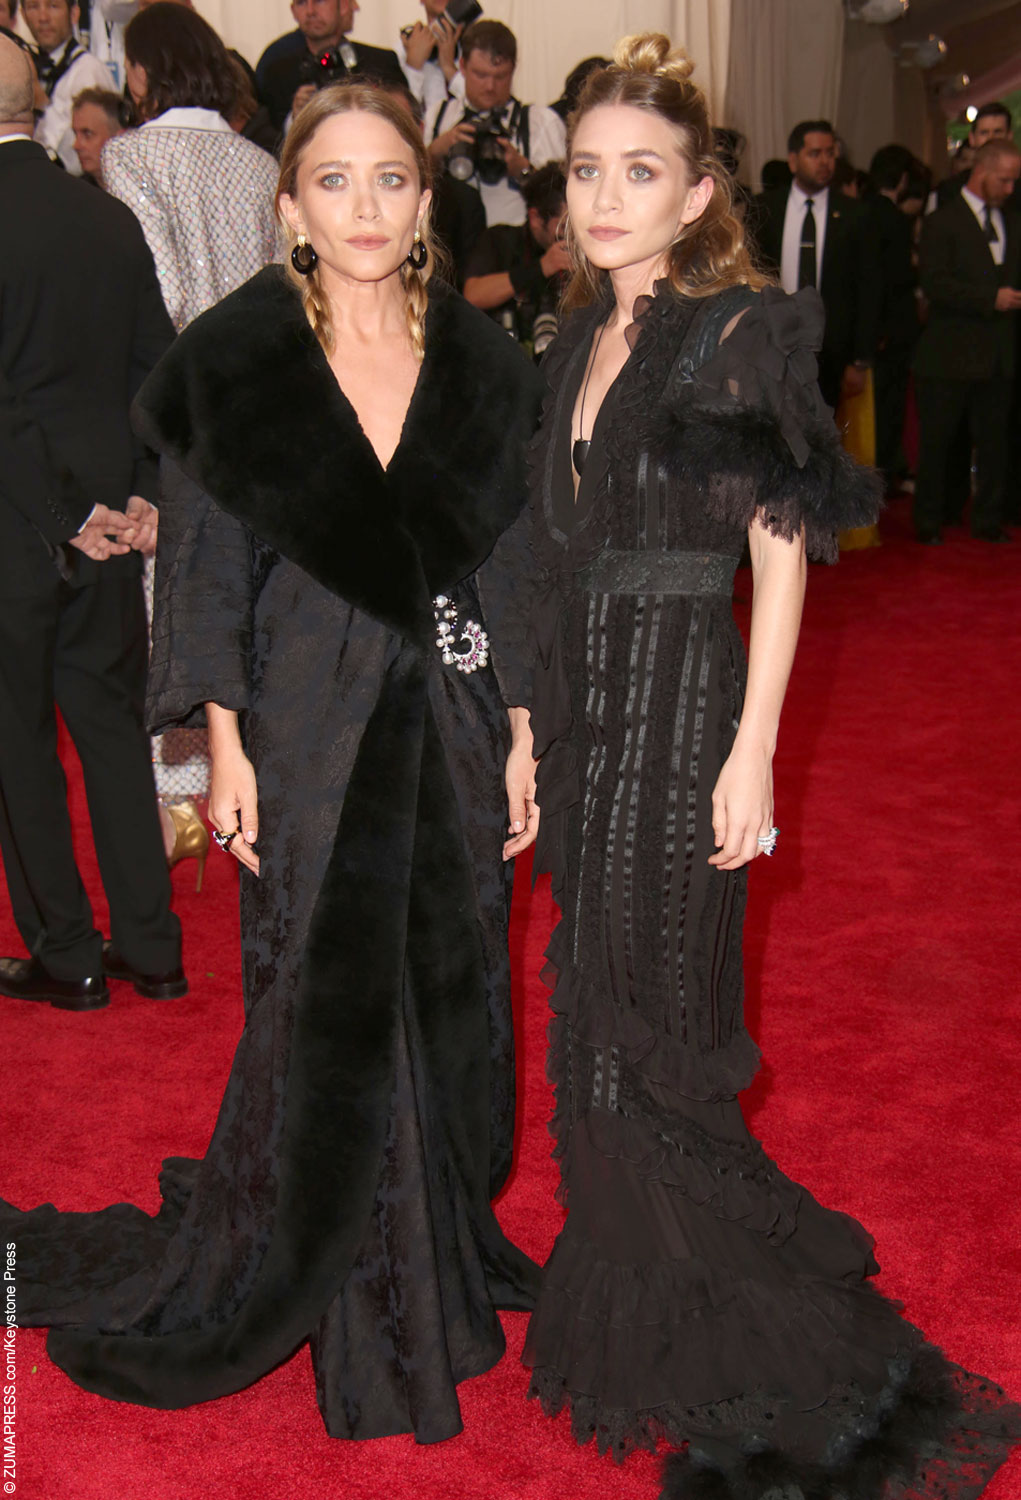 Mary-Kate (left) and Ashley (right) Olsen coordinated in black ensembles on the red carpet. The two fashion icons were both dressed in vintage John Galliano and had their eyes done up in brown shadow, making their big beautiful eyes pop. Mary-Kate opted for her blonde locks in two braids while Ashley went for the trendy half-up […]